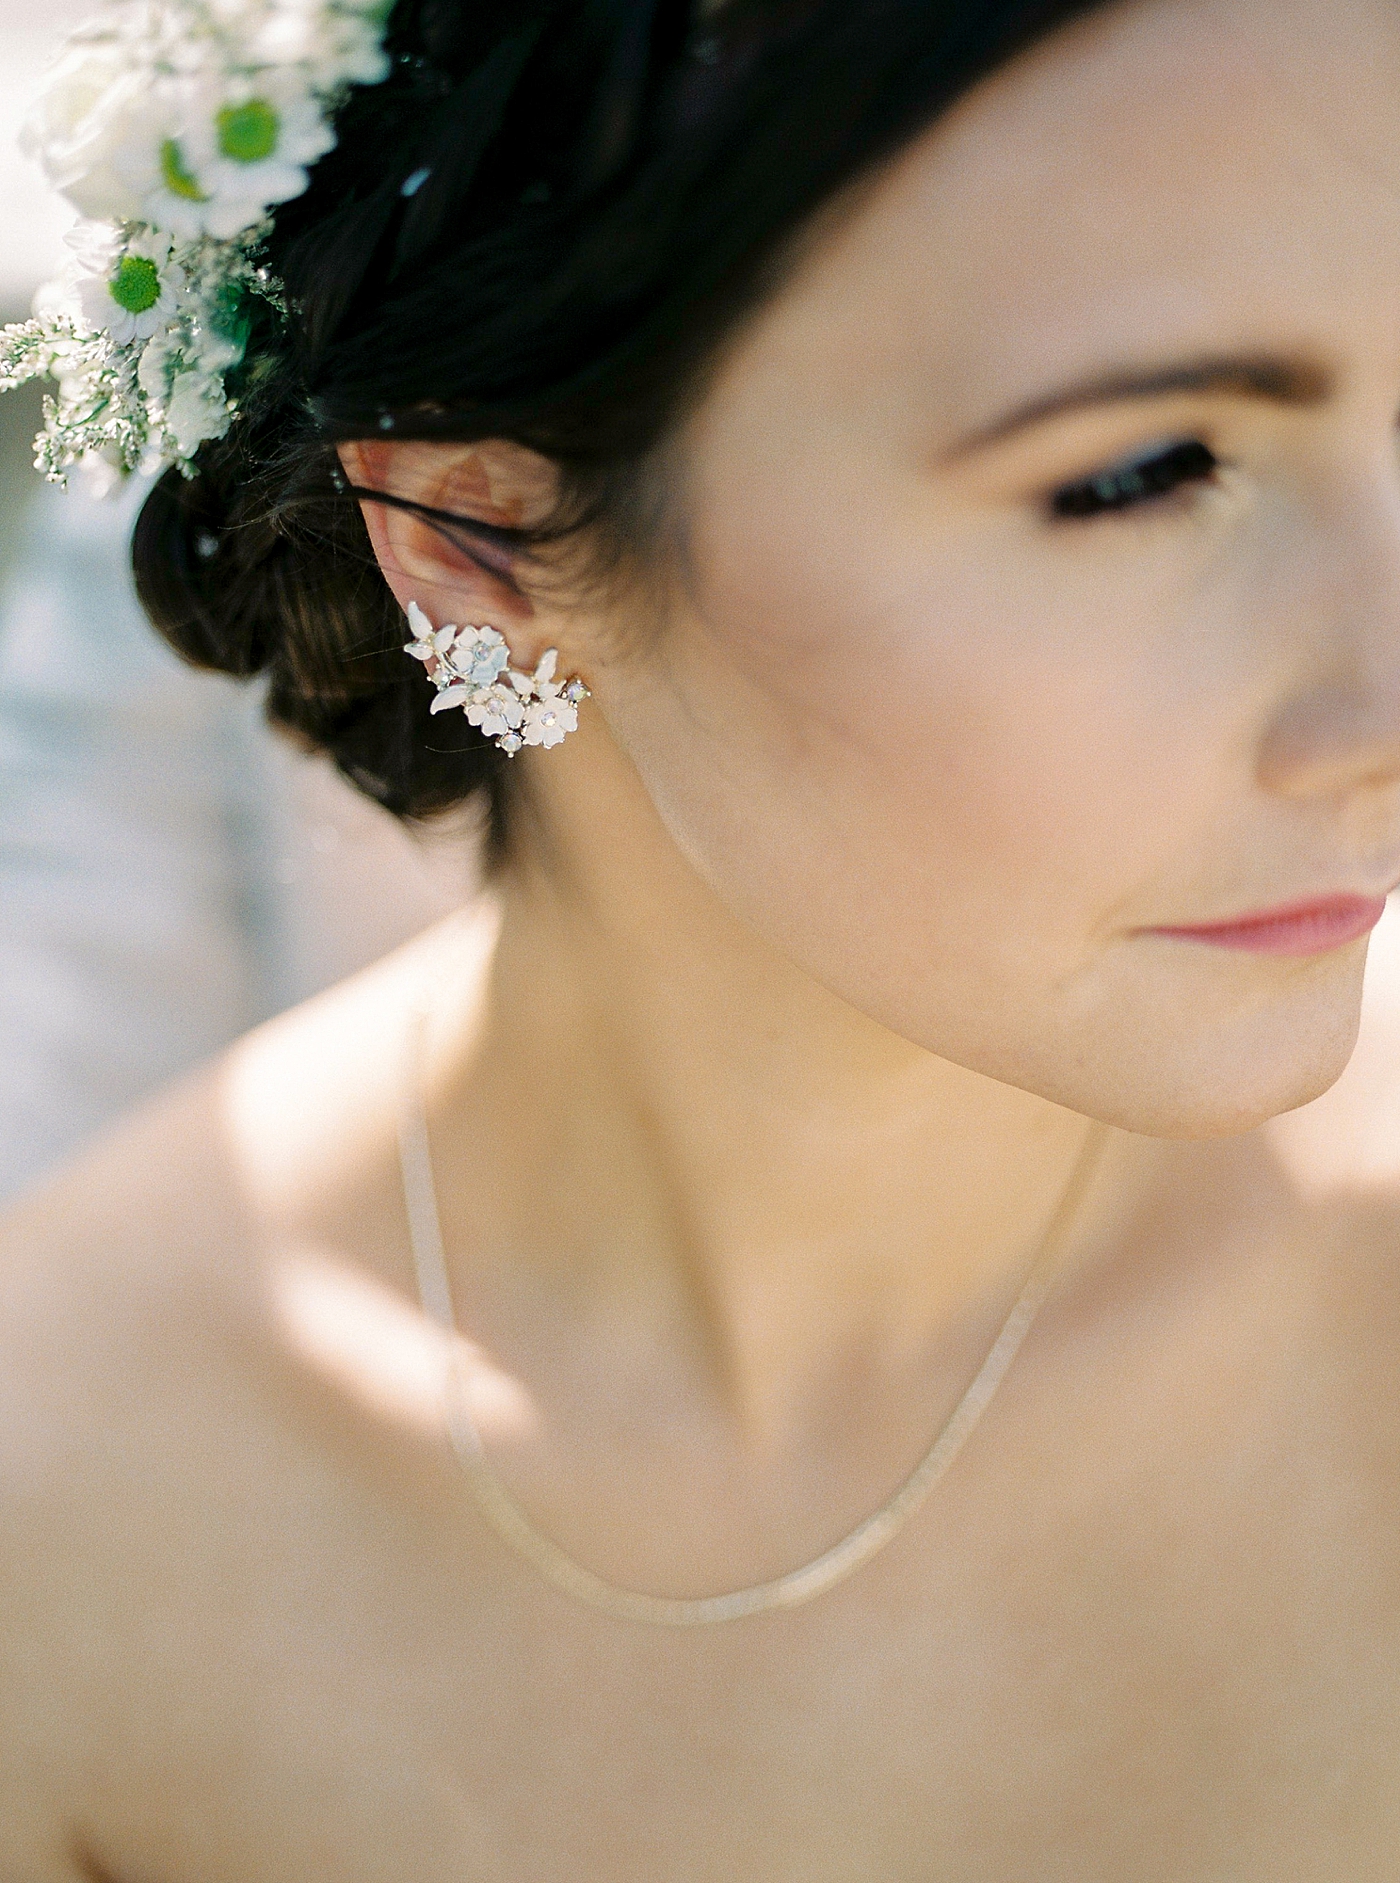 Detail of bride to be's earrings and flower crown | Photo by Diane Sotero 